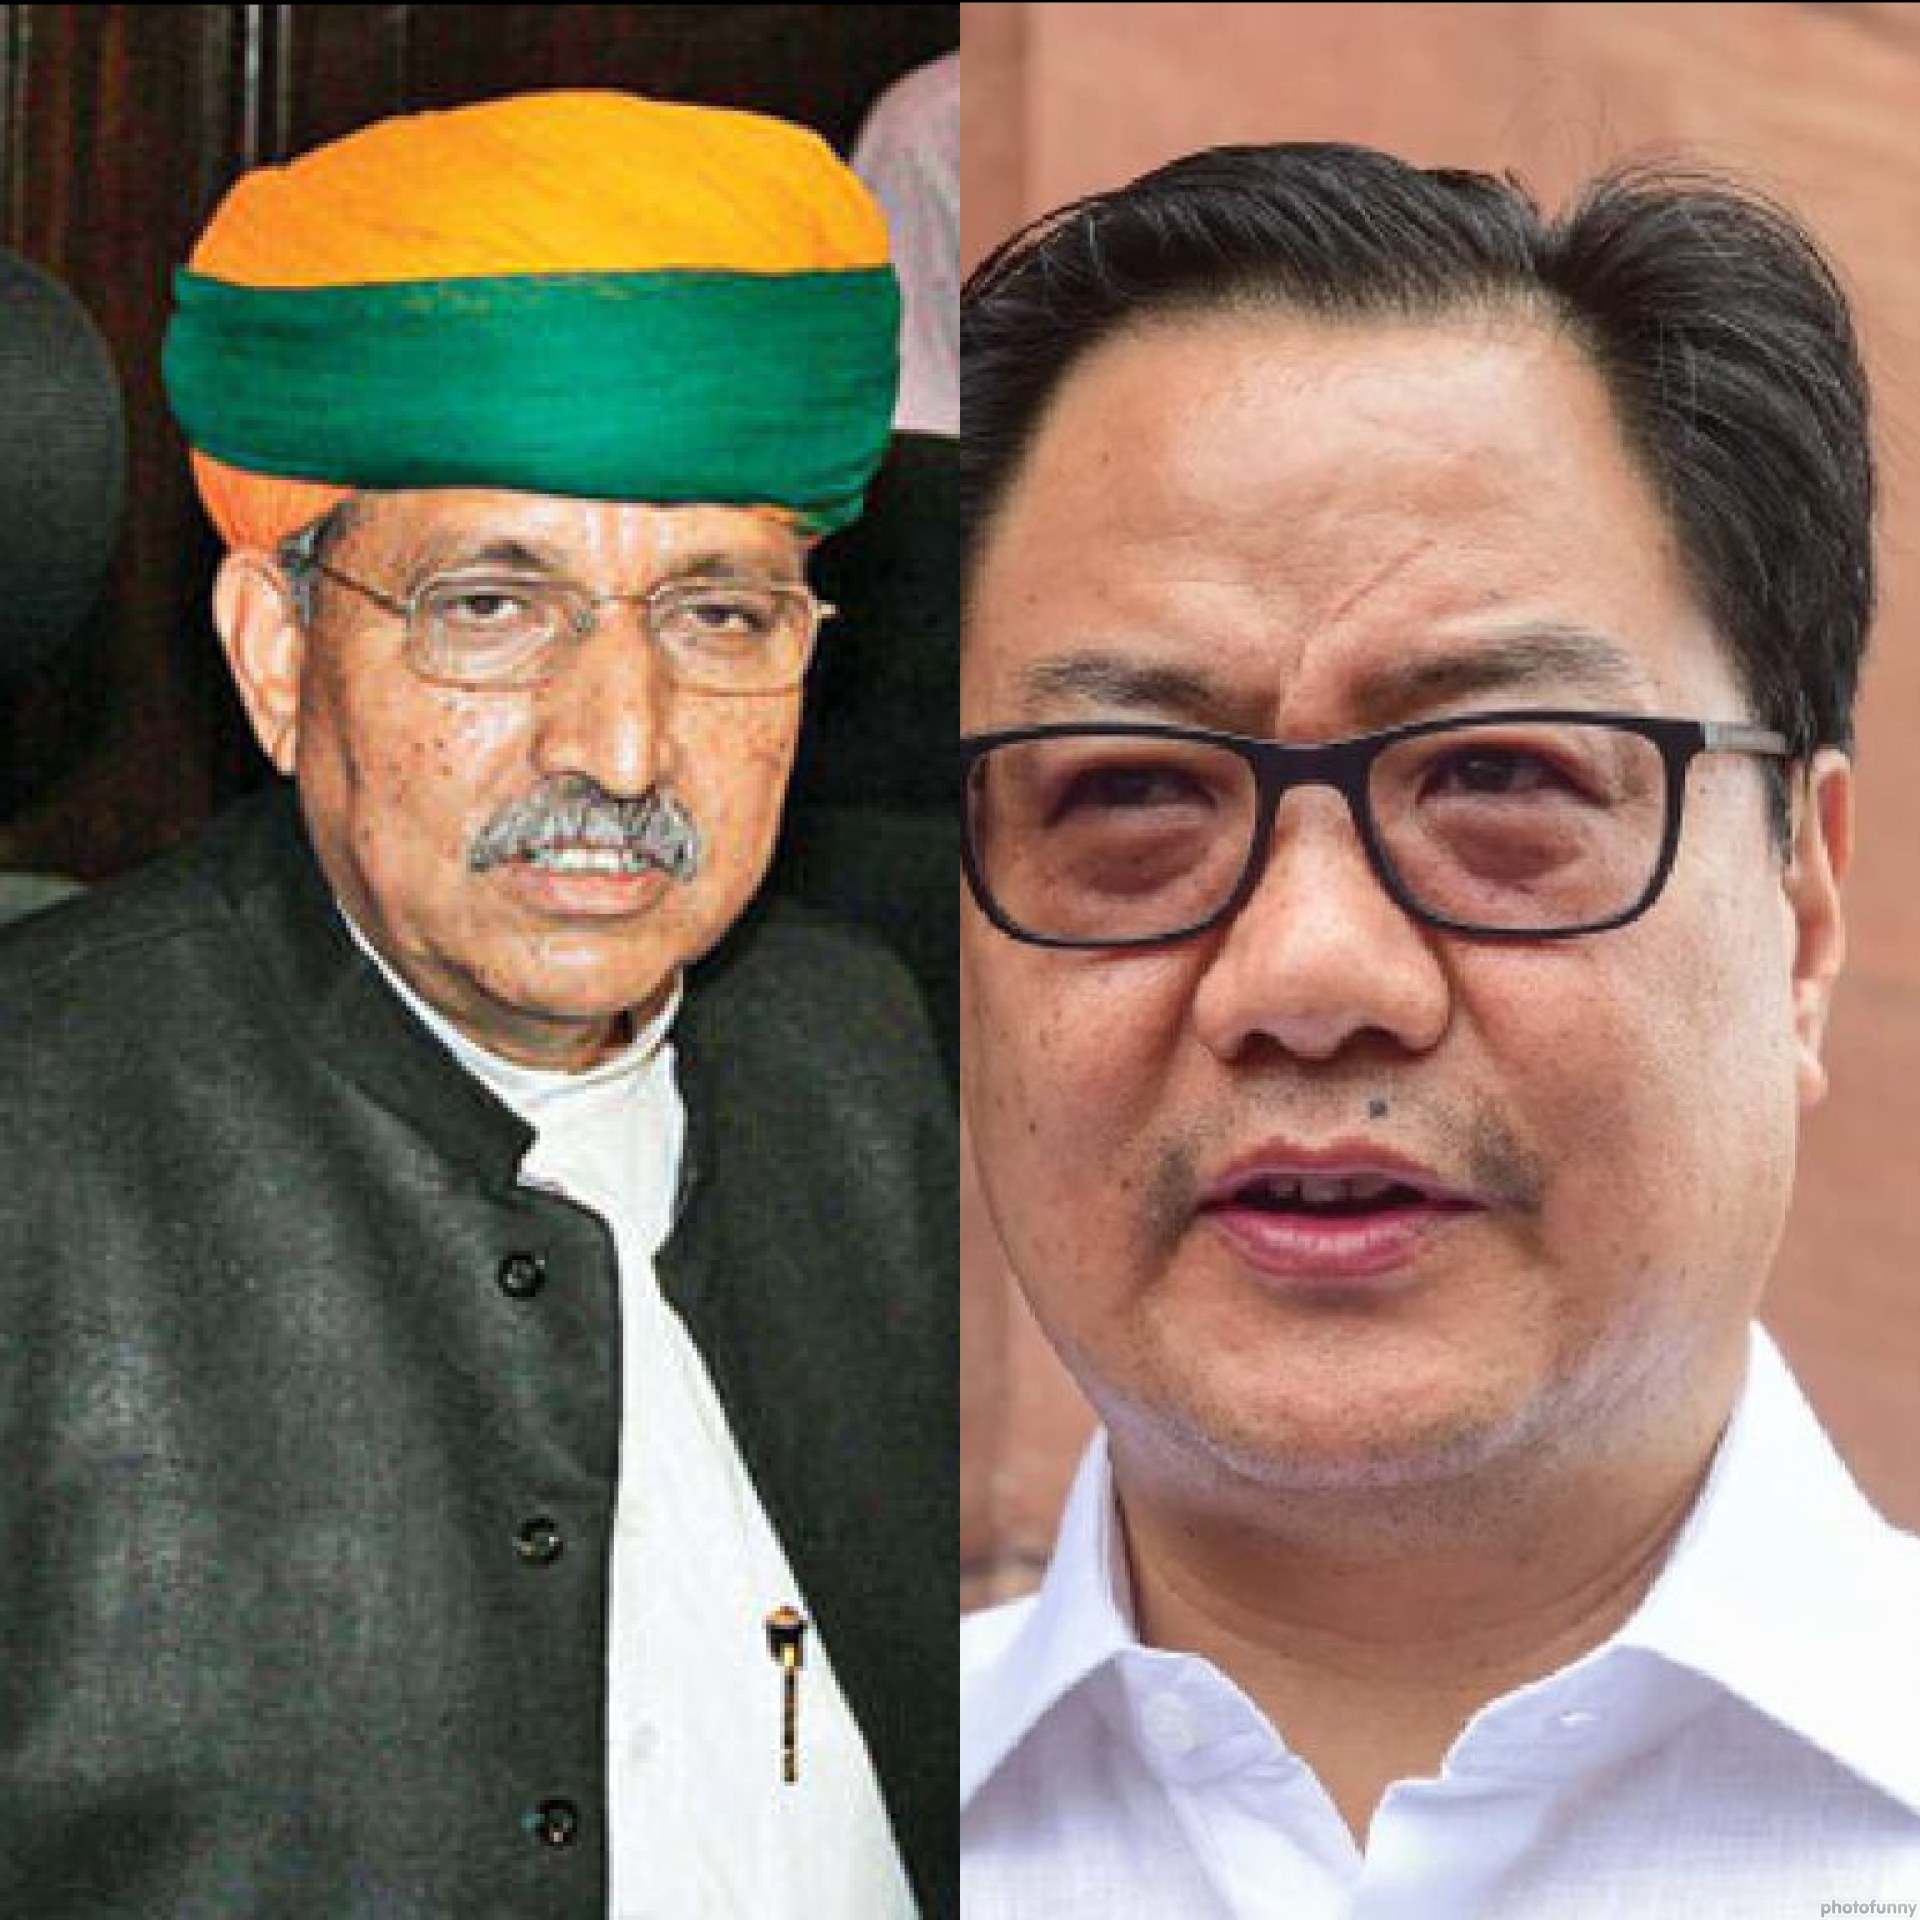 Arjun Meghwal replaces Rijiju as Law Minister in surprise Cabinet shuffle